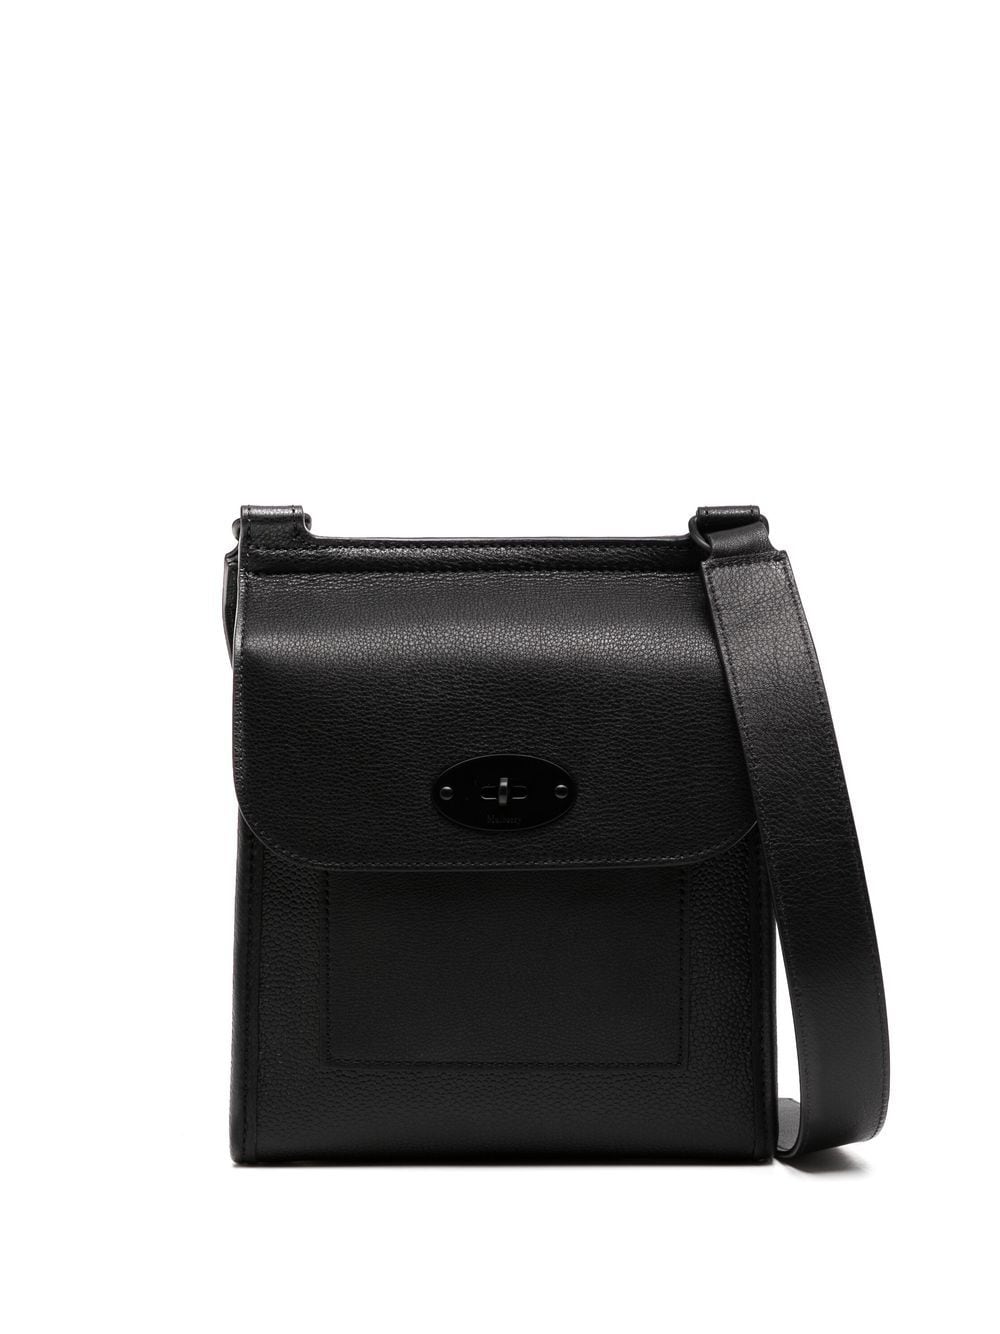 Mulberry Antony Leather Messenger Bag In 黑色